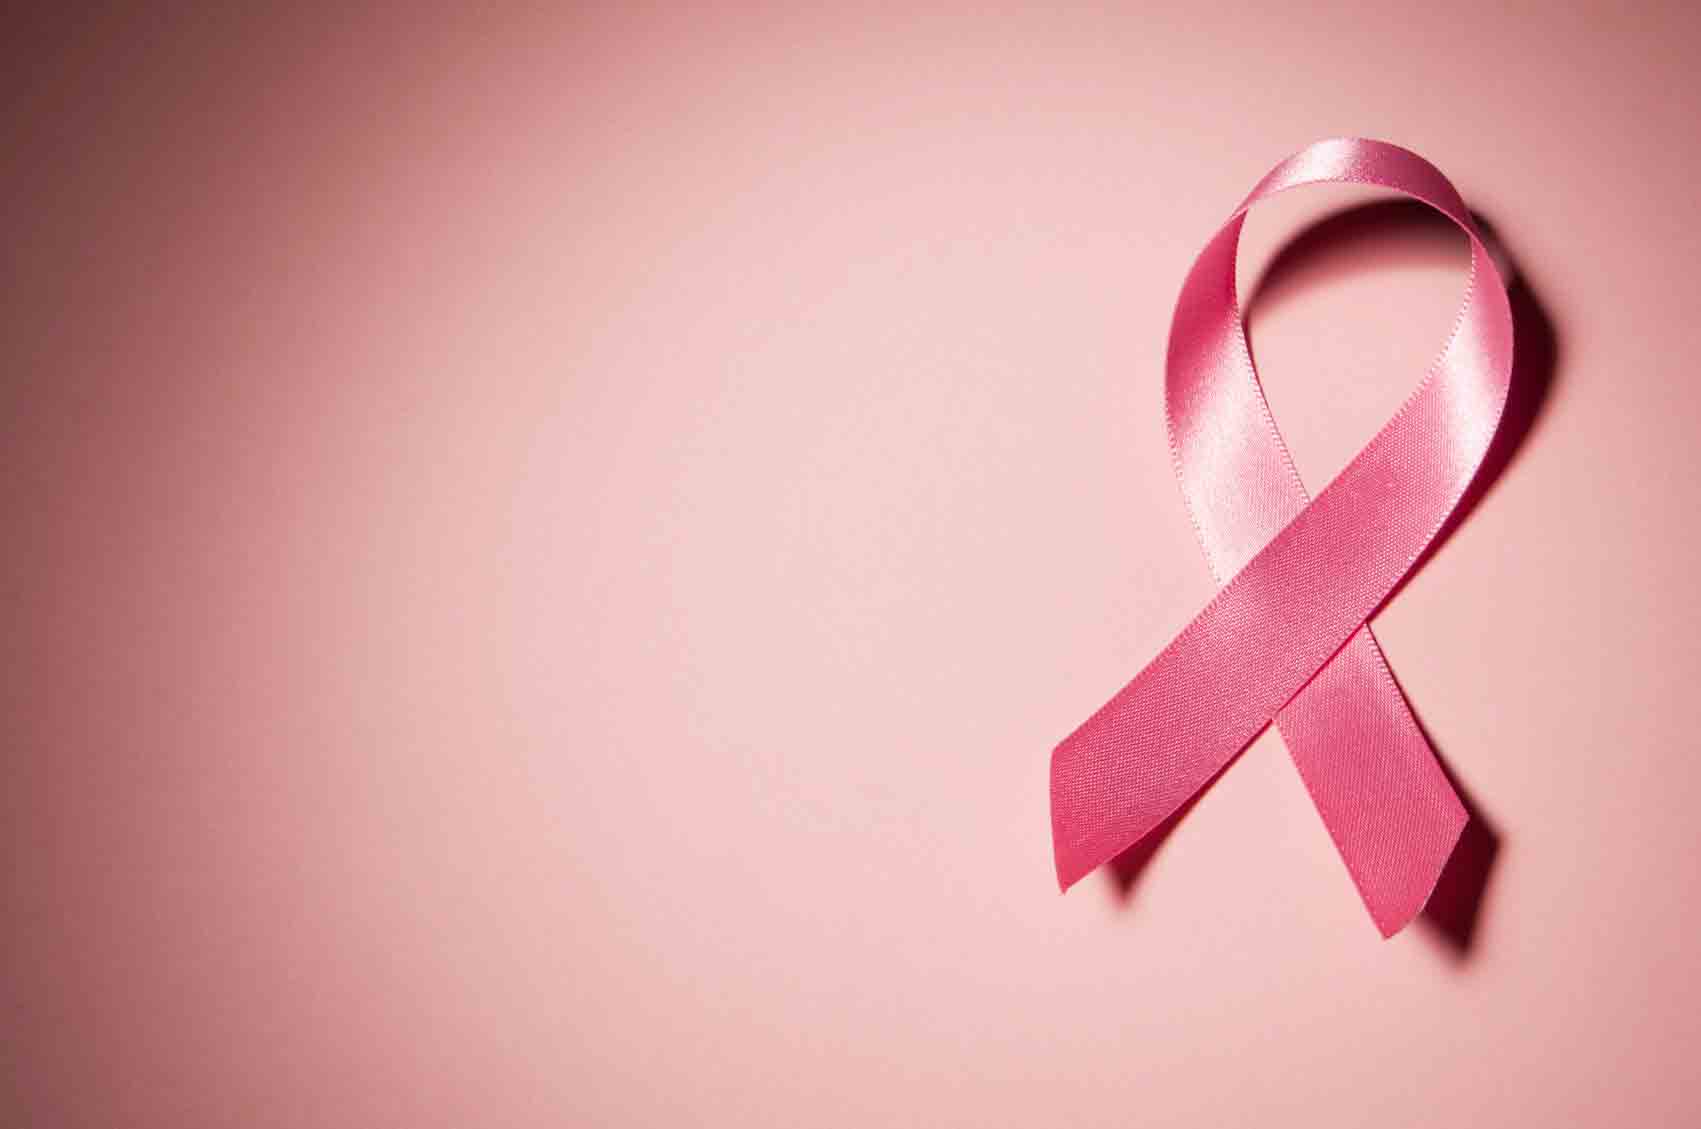 Beating Breast Cancer Pain: What You Need to Know